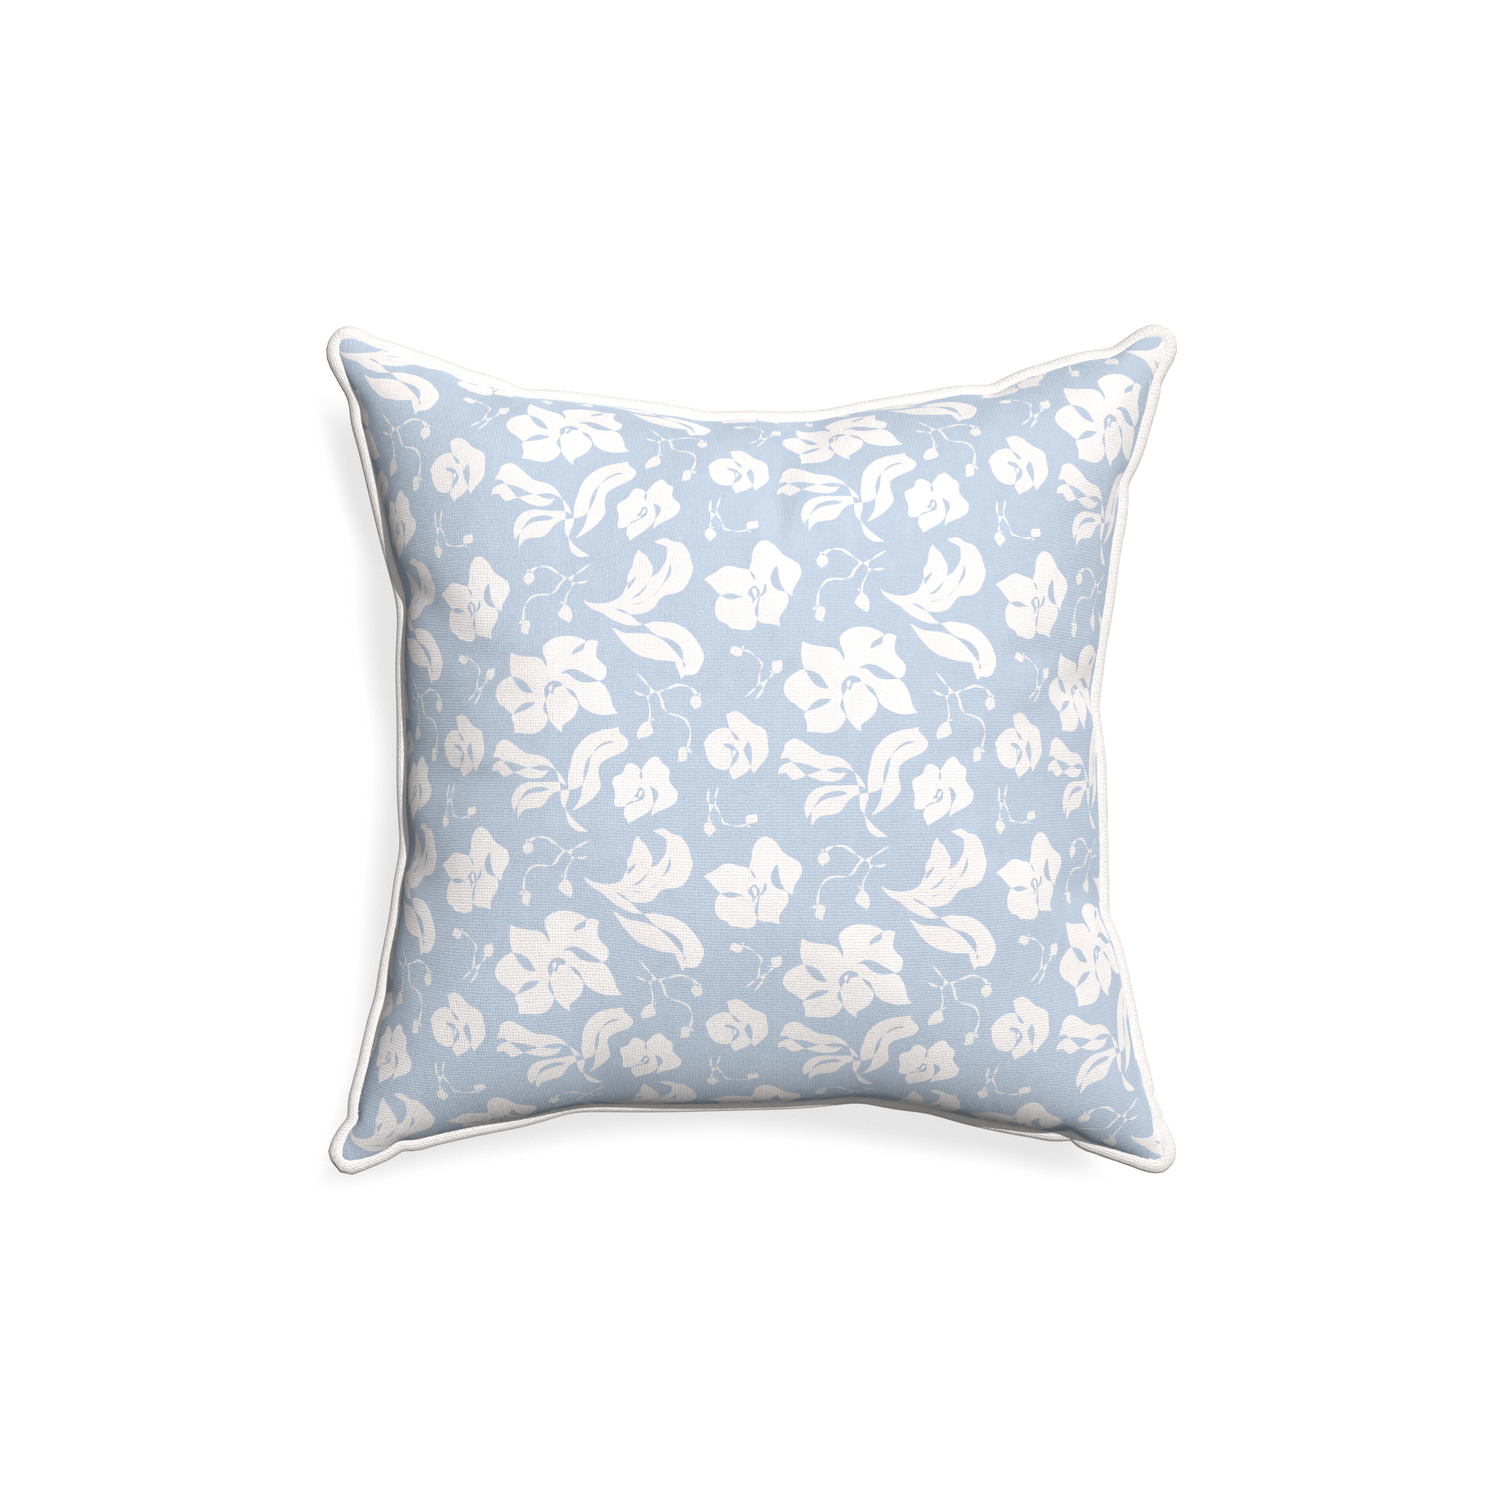 18-square georgia custom cornflower blue floralpillow with snow piping on white background